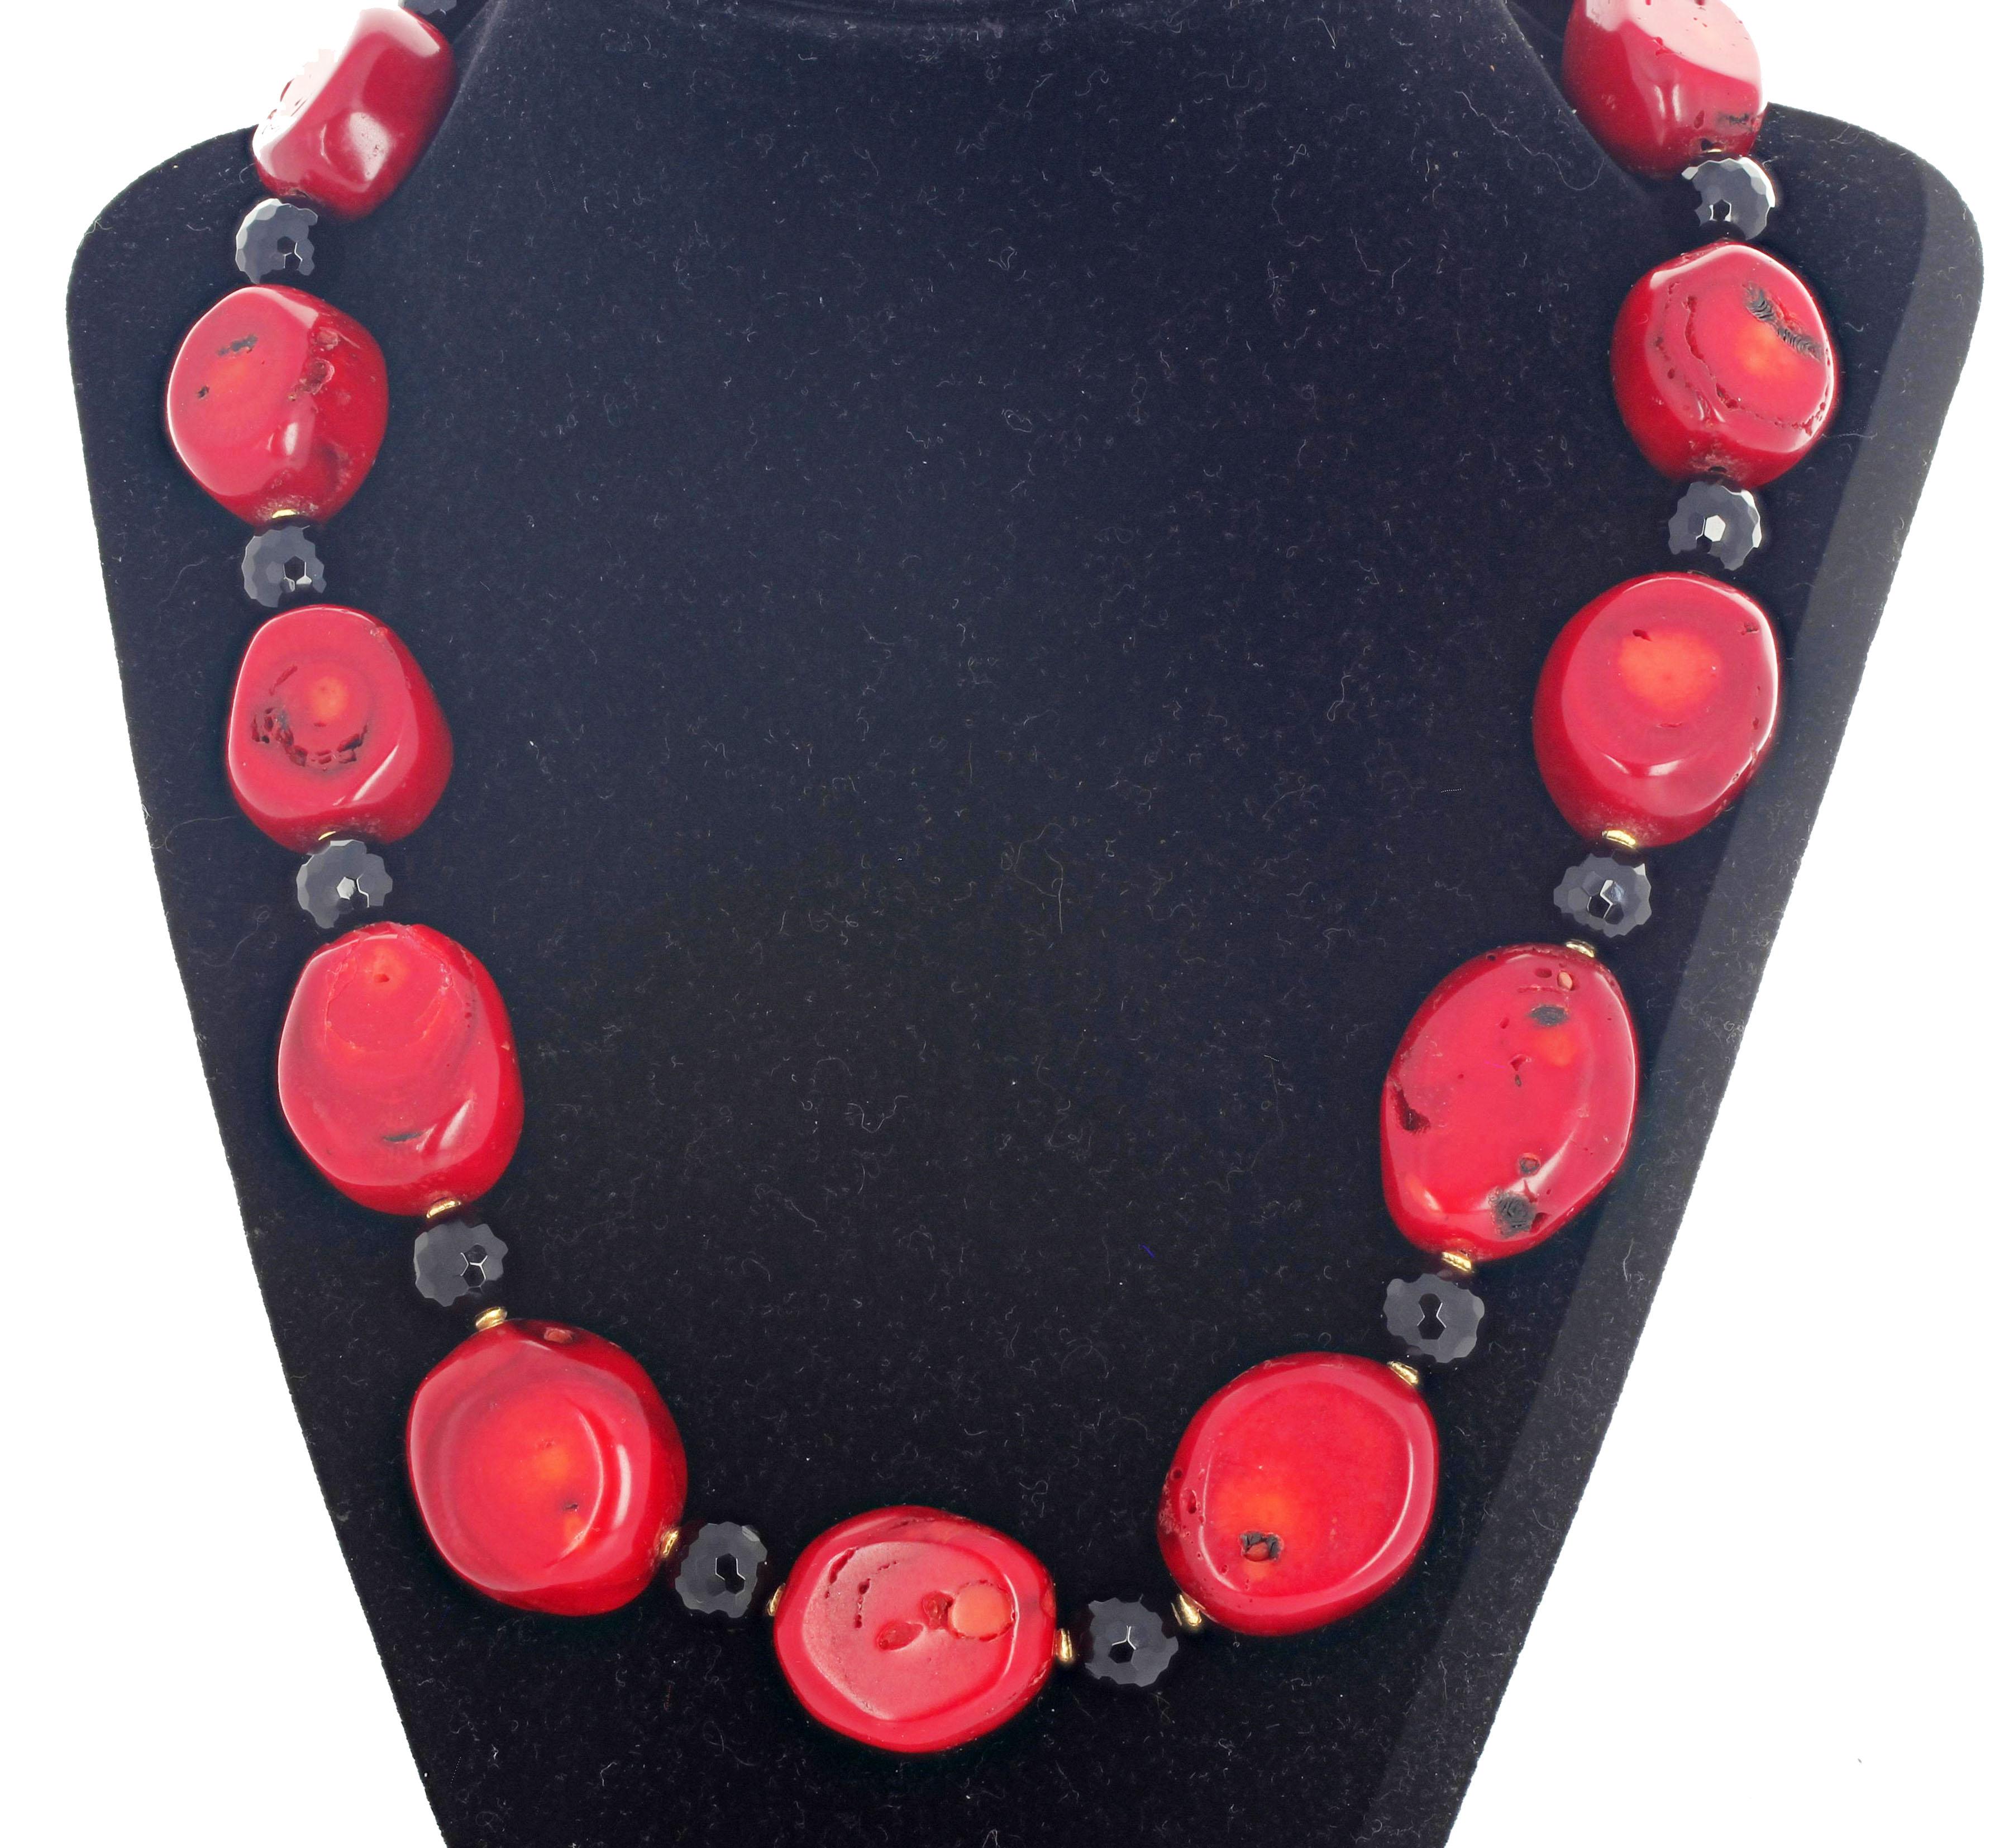 Beautiful natural red Coral - 28mm x 22 mm the largest - enhanced with sparkling checkerboard gem cut black Onyx and tiny gold plated rondels set in this 20 inch long elegant necklace.  